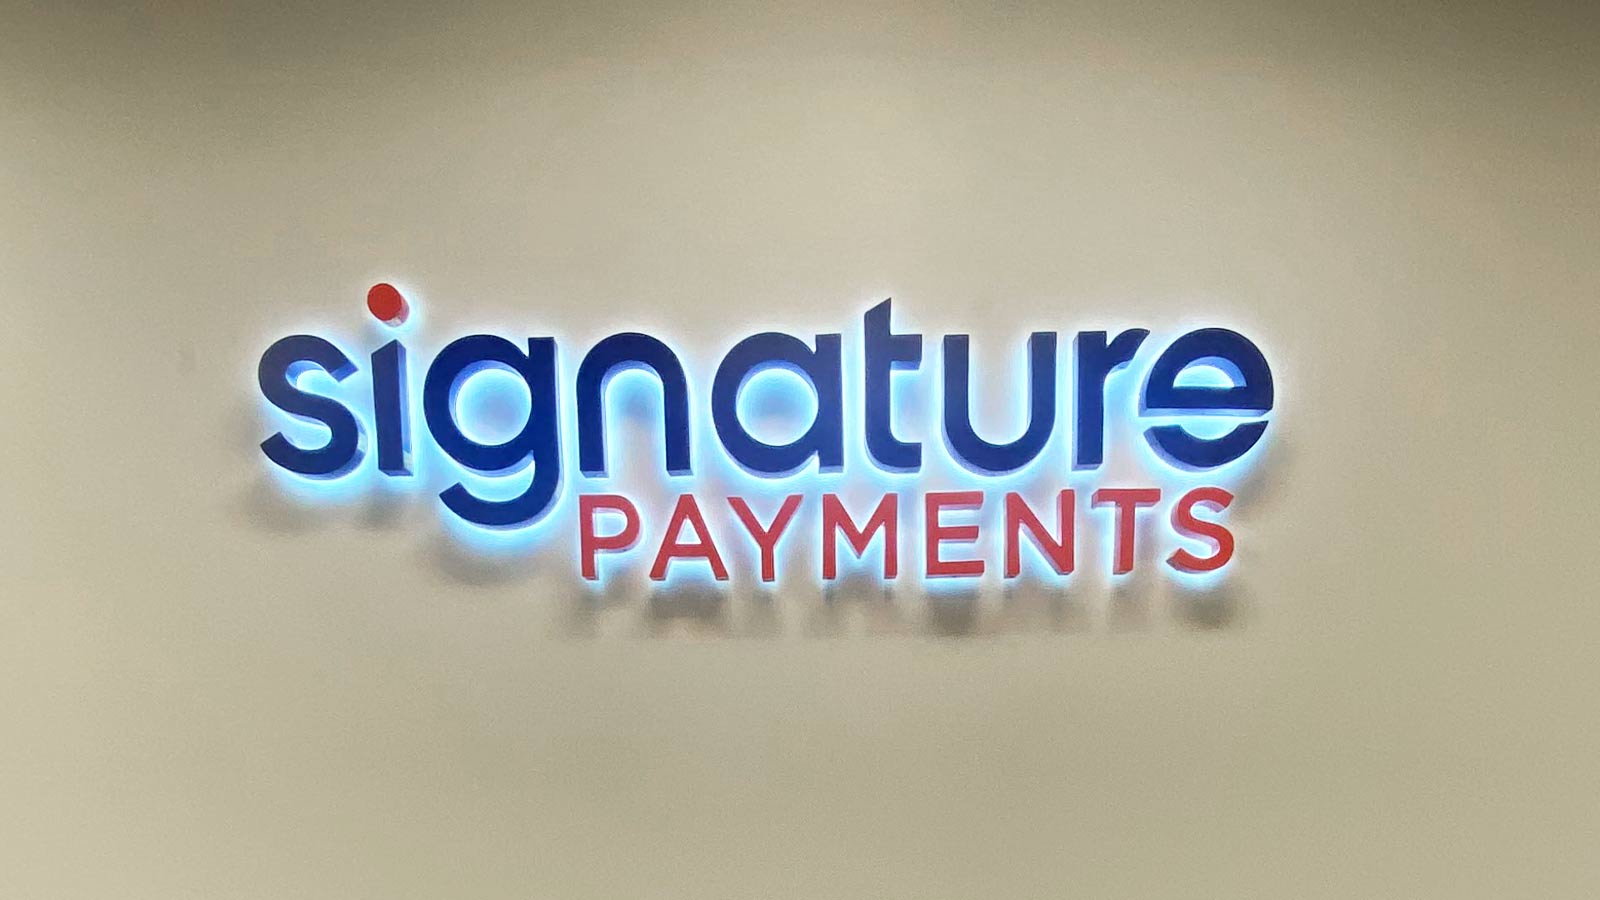 signature payments backlit channel letters mounted on a wall